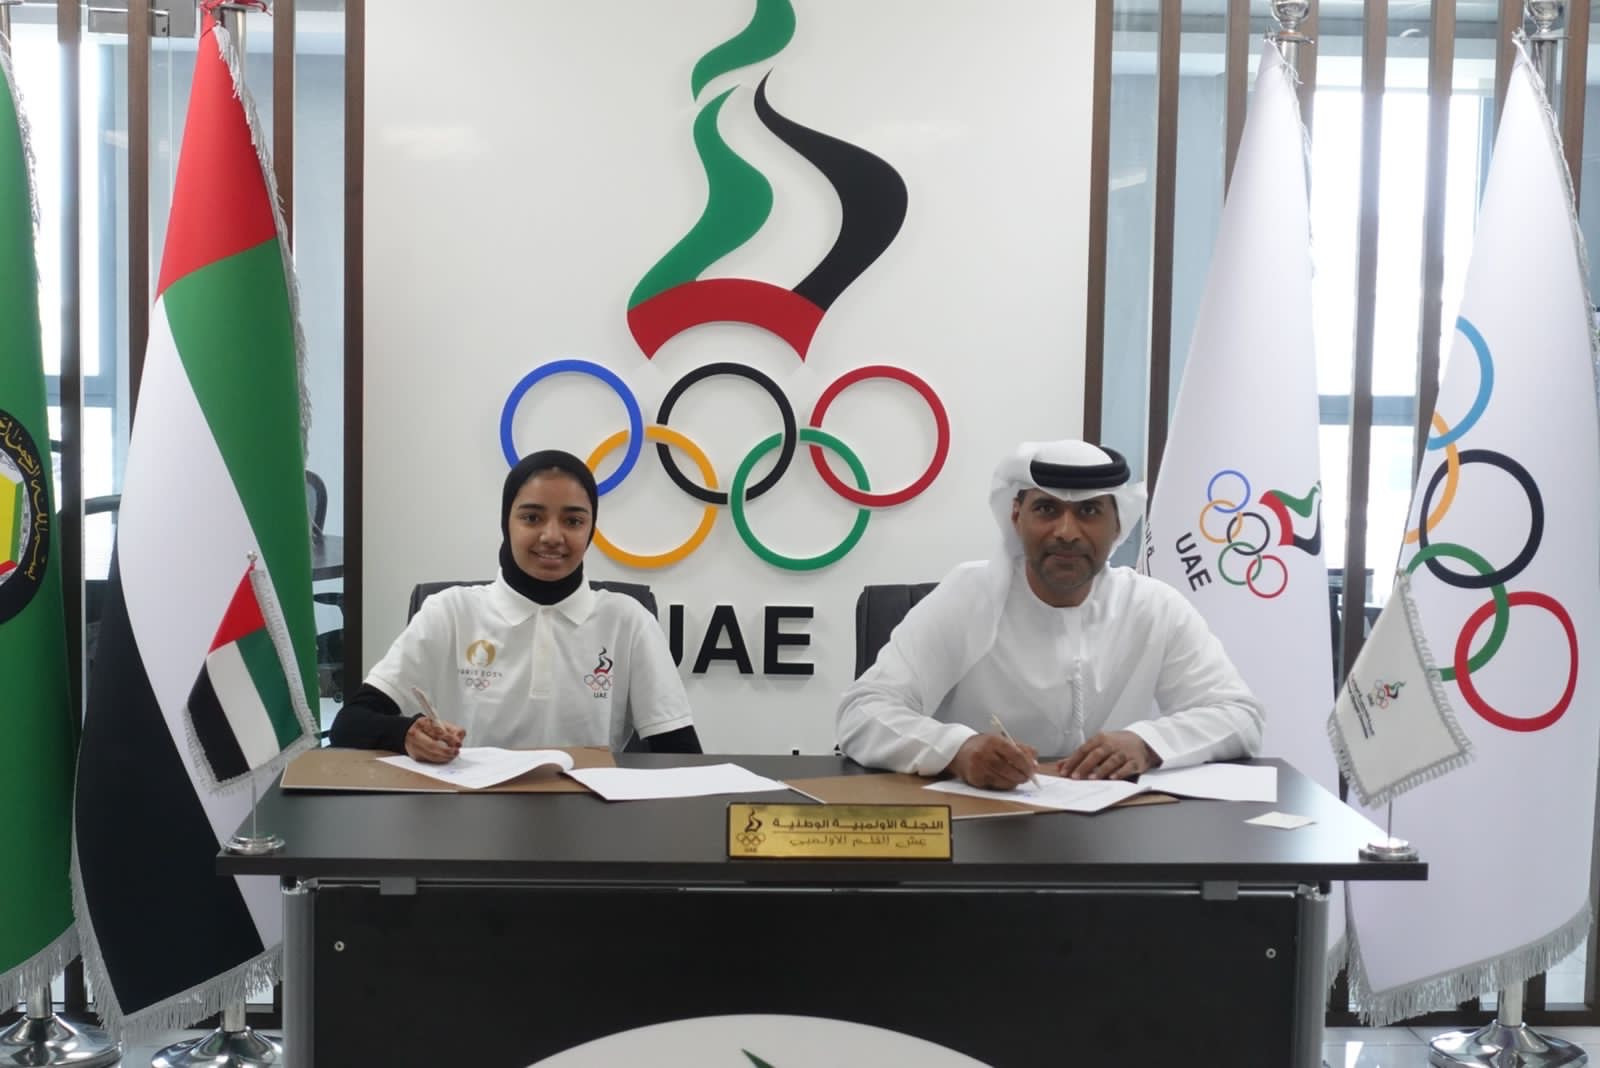 The UAE NOC has signed an Olympic grant agreement to support athletes preparing for Paris 2024 ©UAE NOC